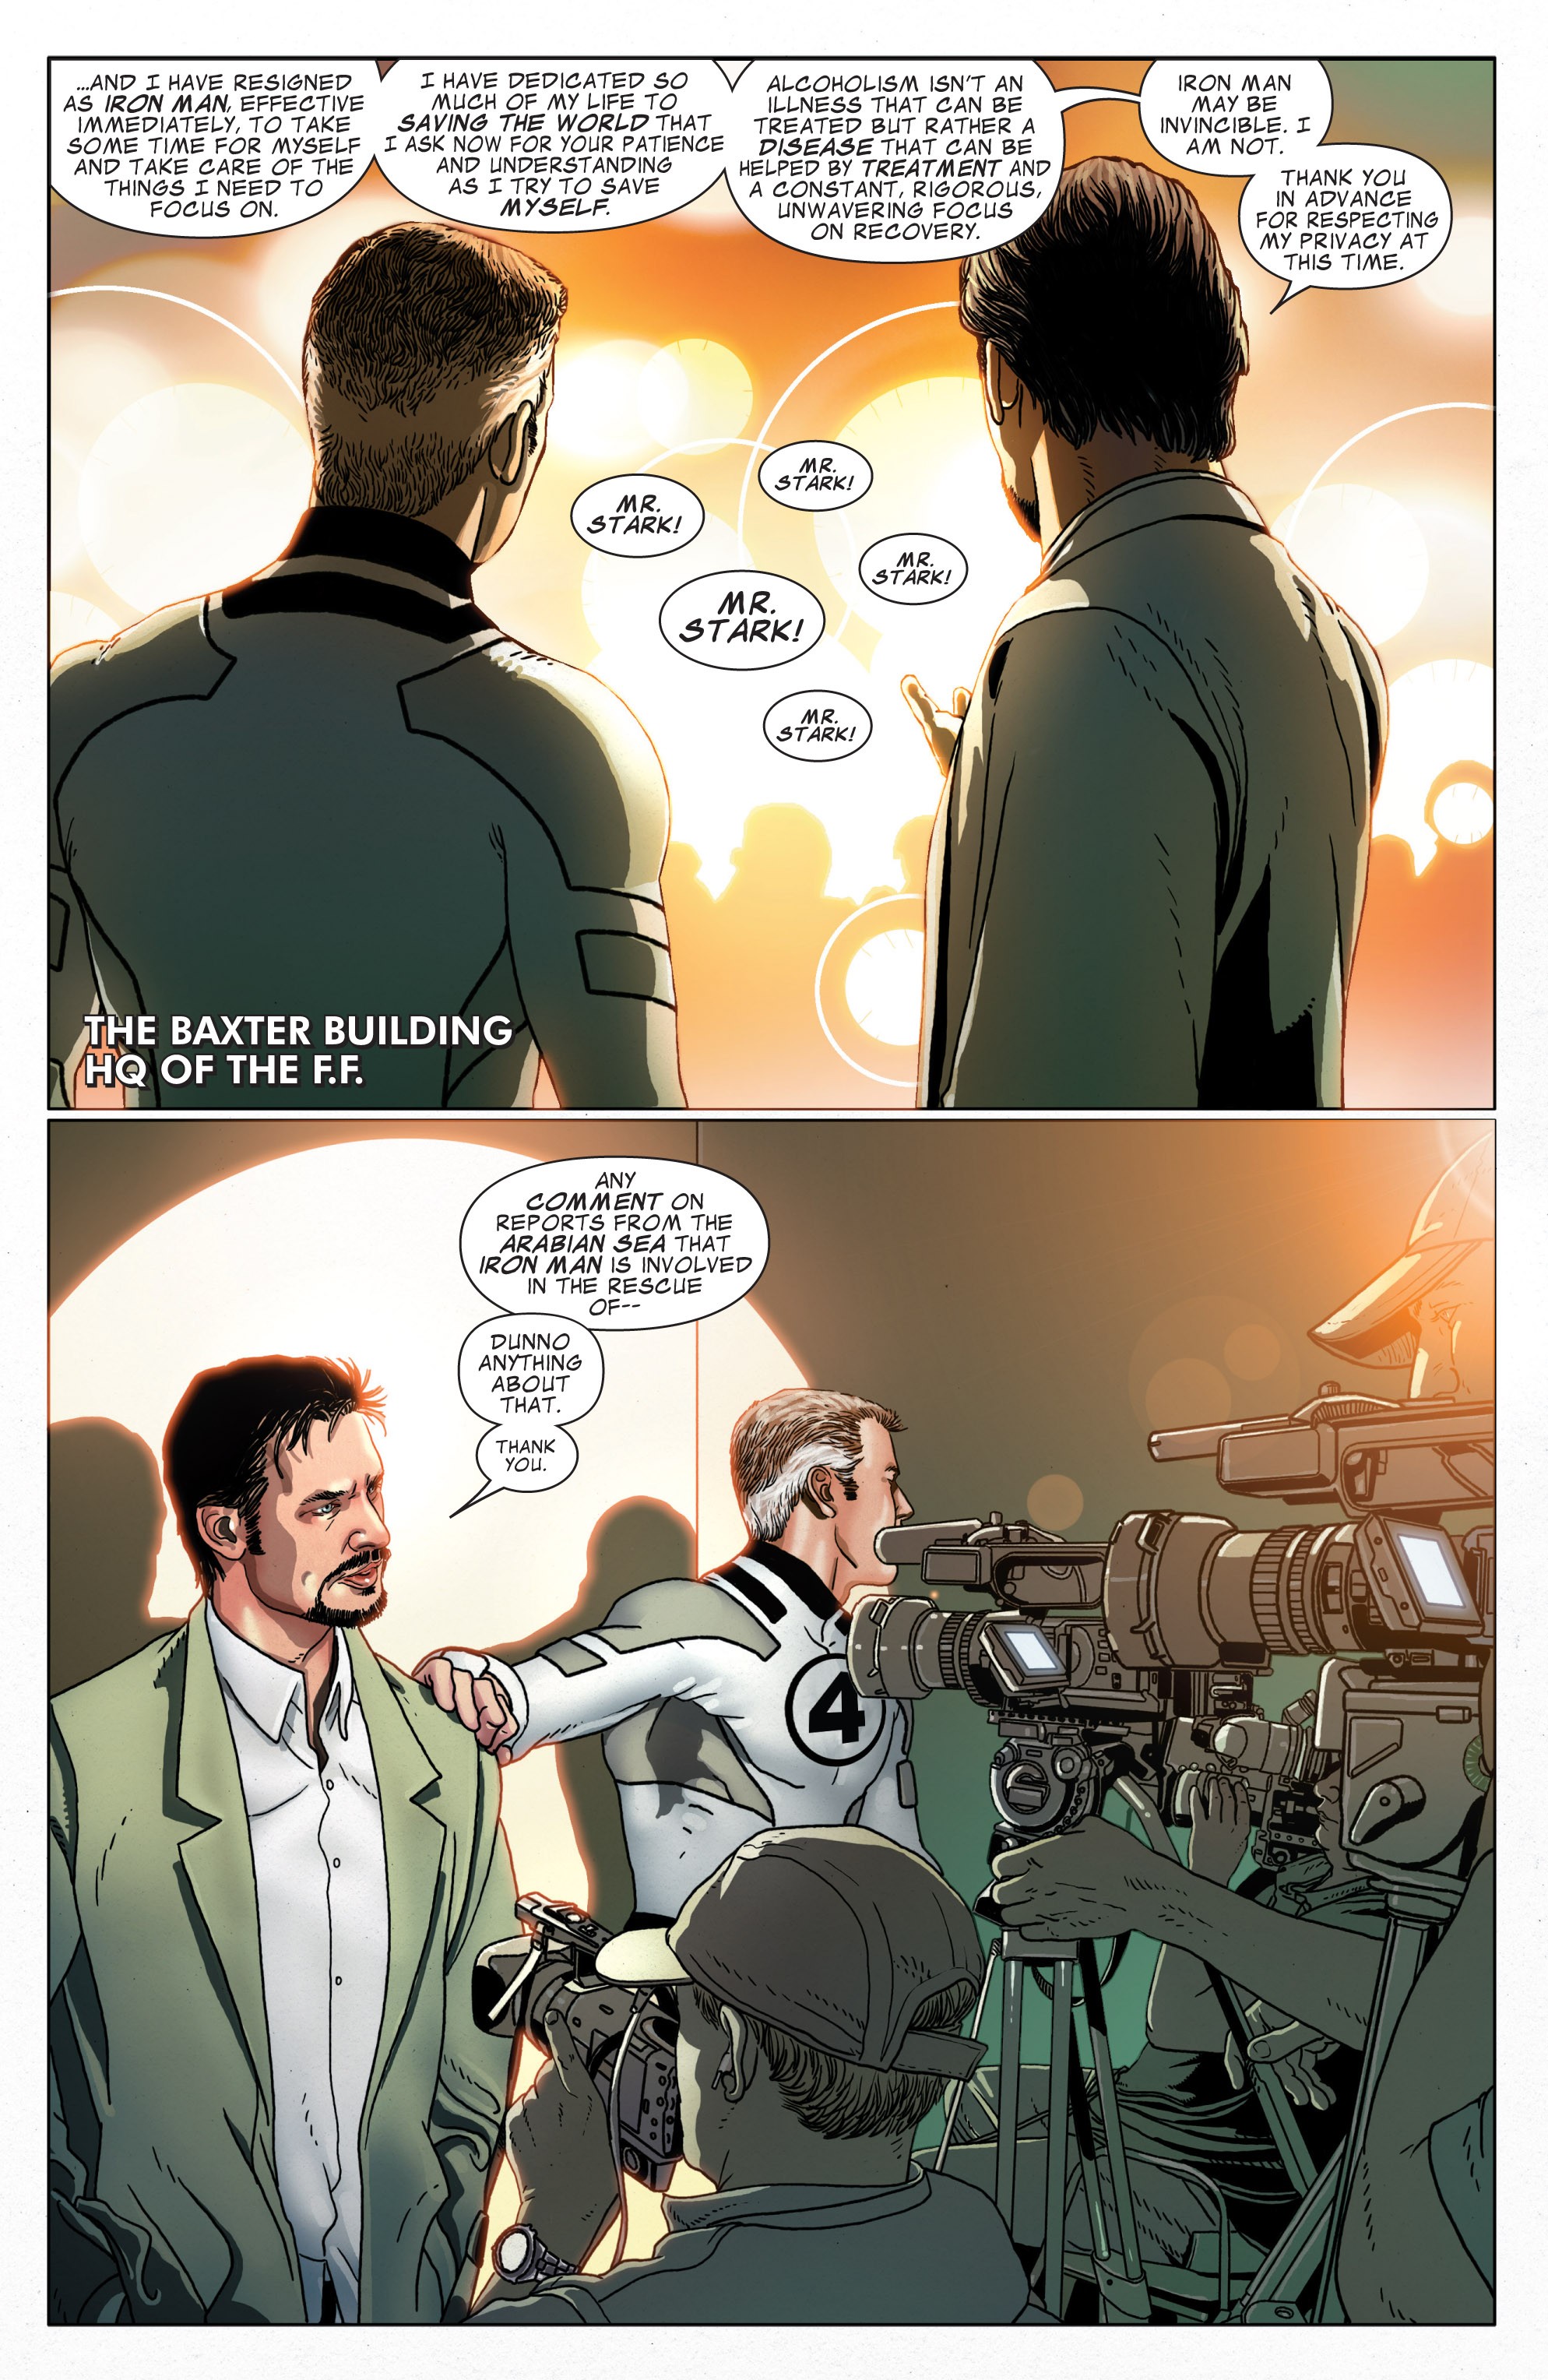 Invincible Iron Man (2008) 518 Page 2